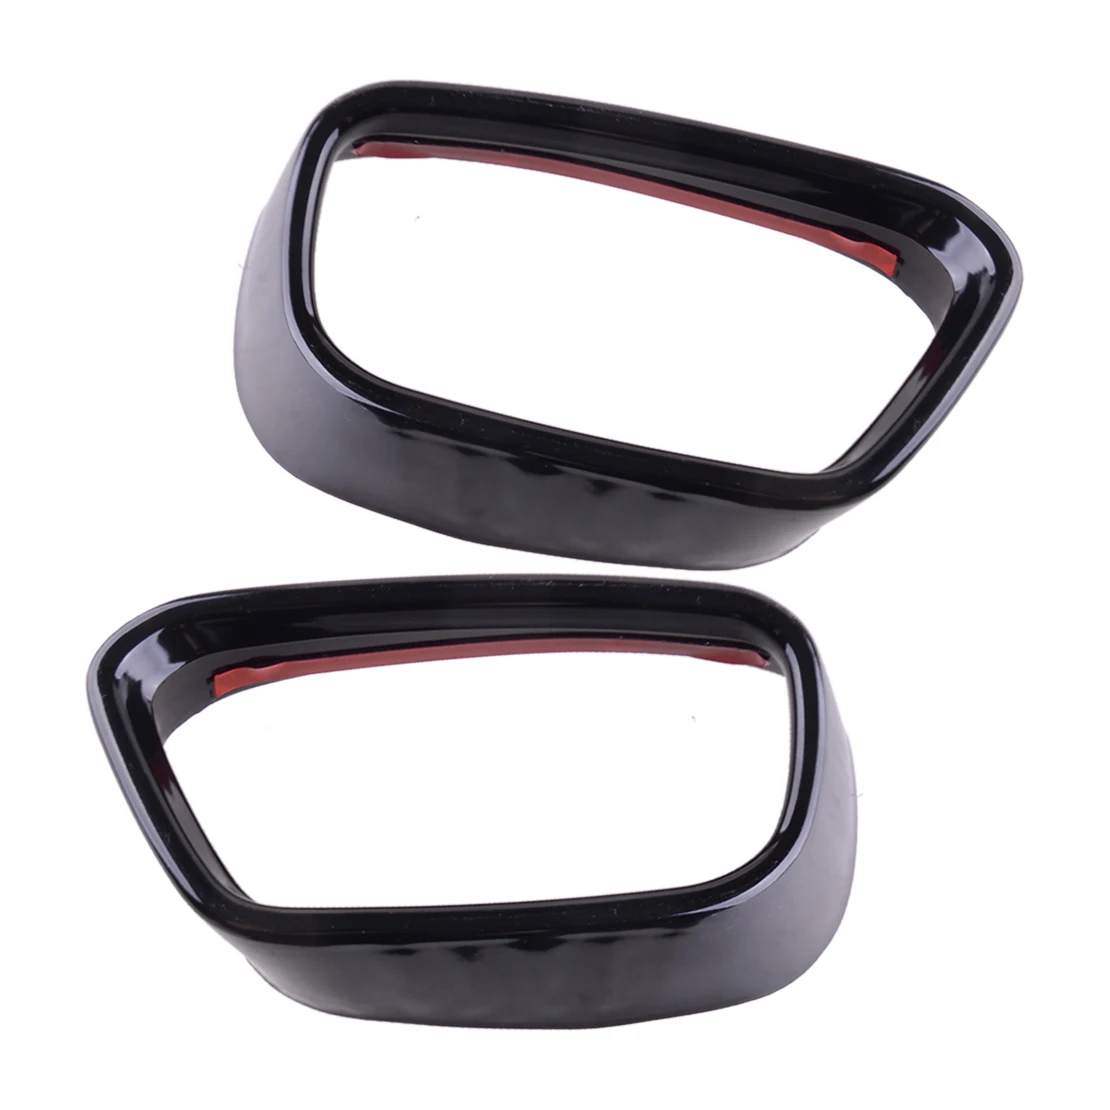 CITALL 2pcs Tail Exhaust Muffler Pipe Cover Trim 